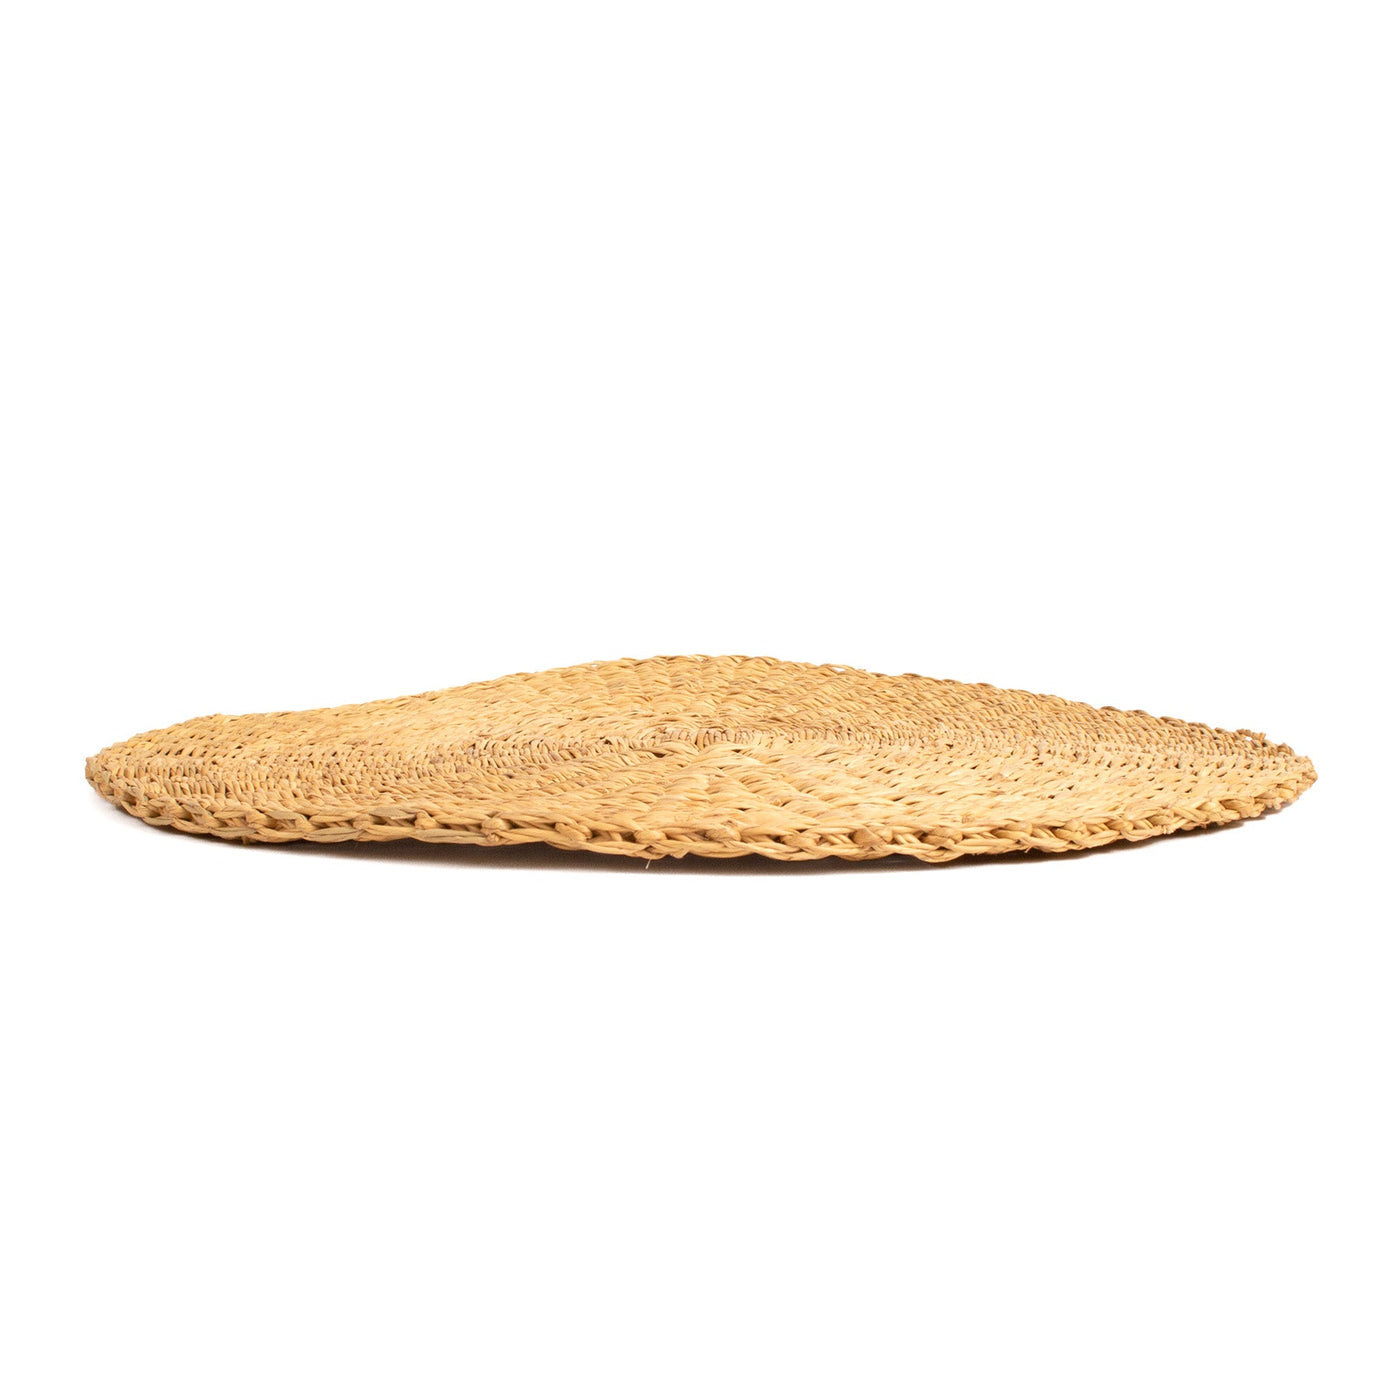 Earthen Craft Placemats - 15" Natural Rounds, Set of 2